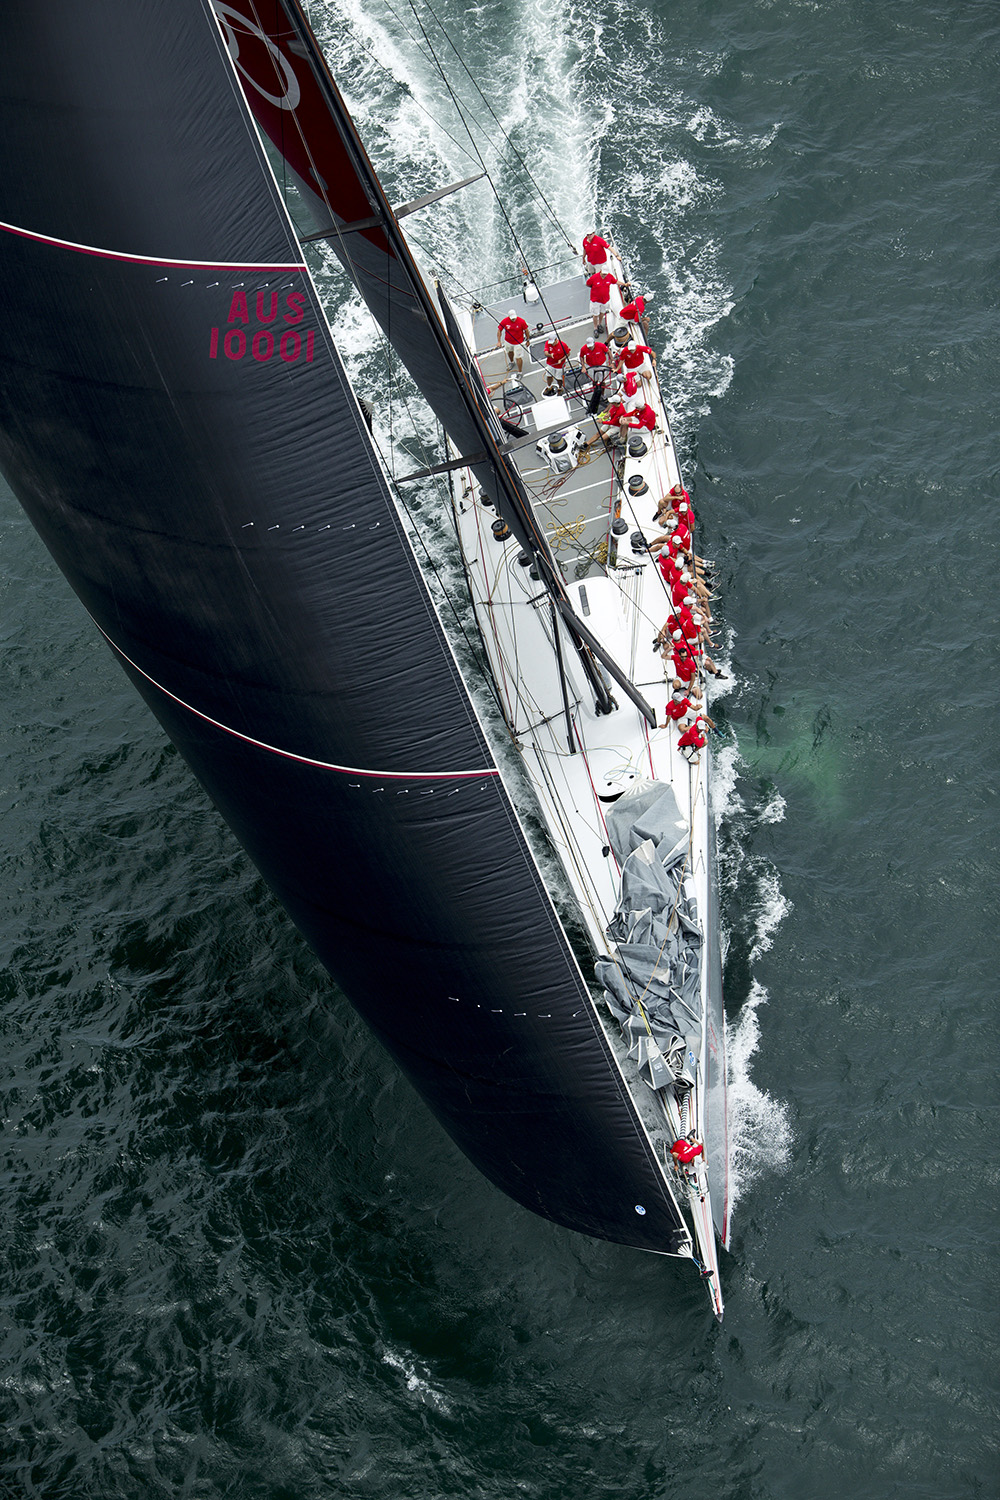 Wild Oats XI looking for a race record time in the Brisbane to Keppel Yacht race